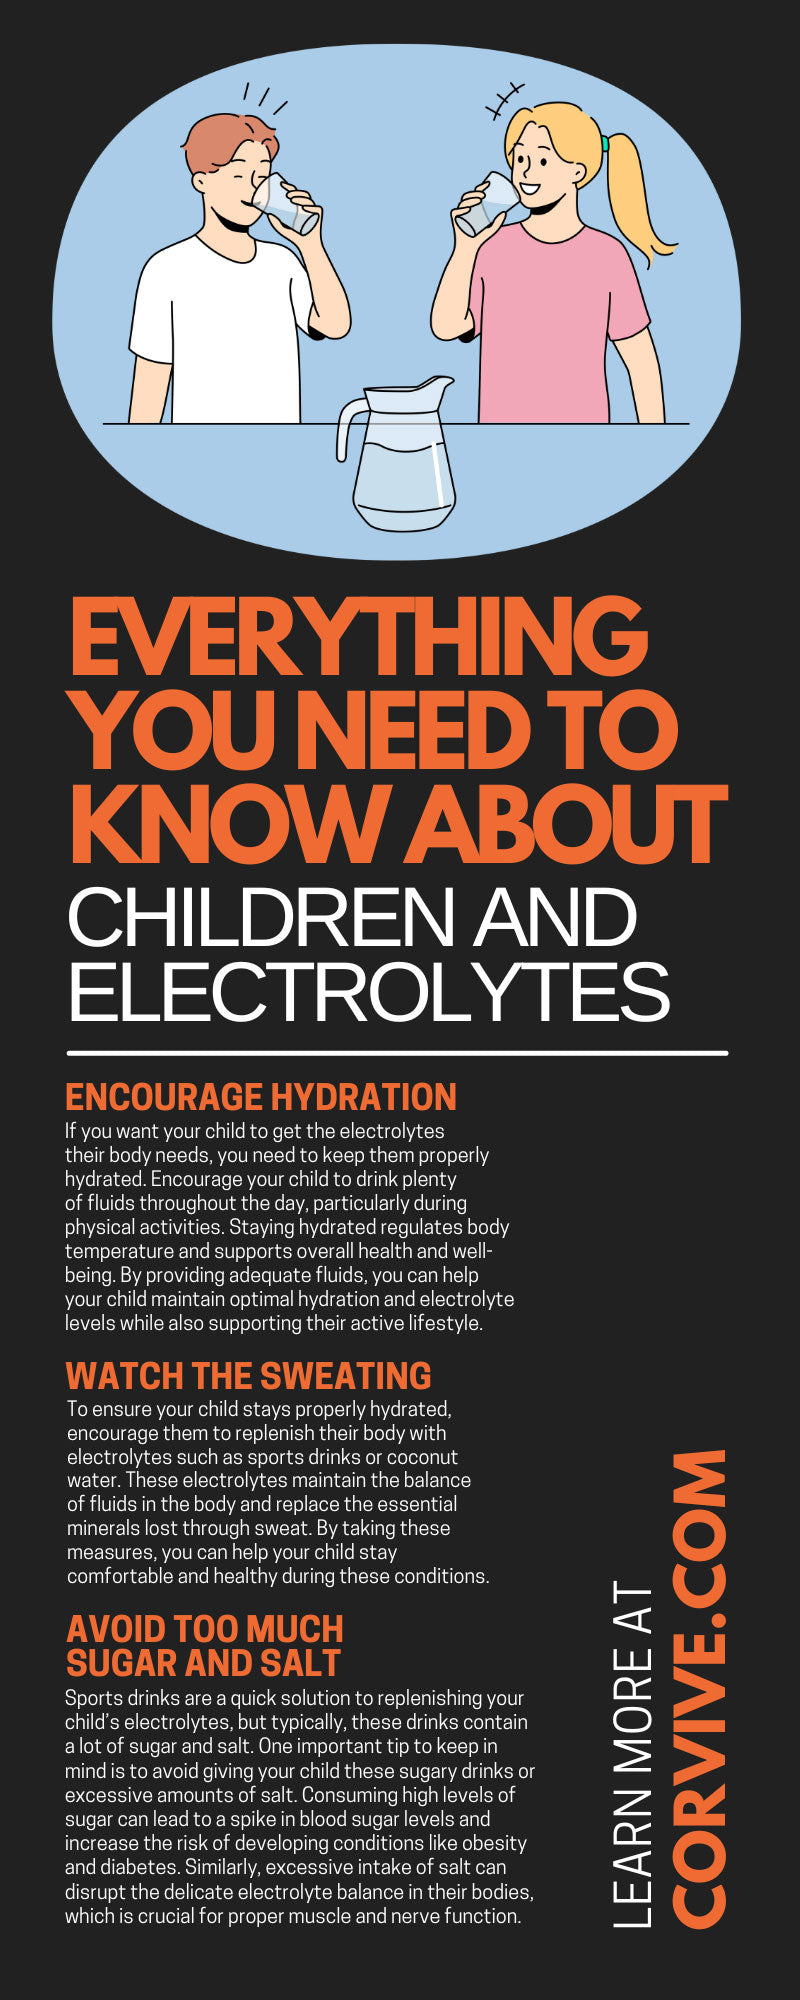 Everything You Need To Know About Children and Electrolytes